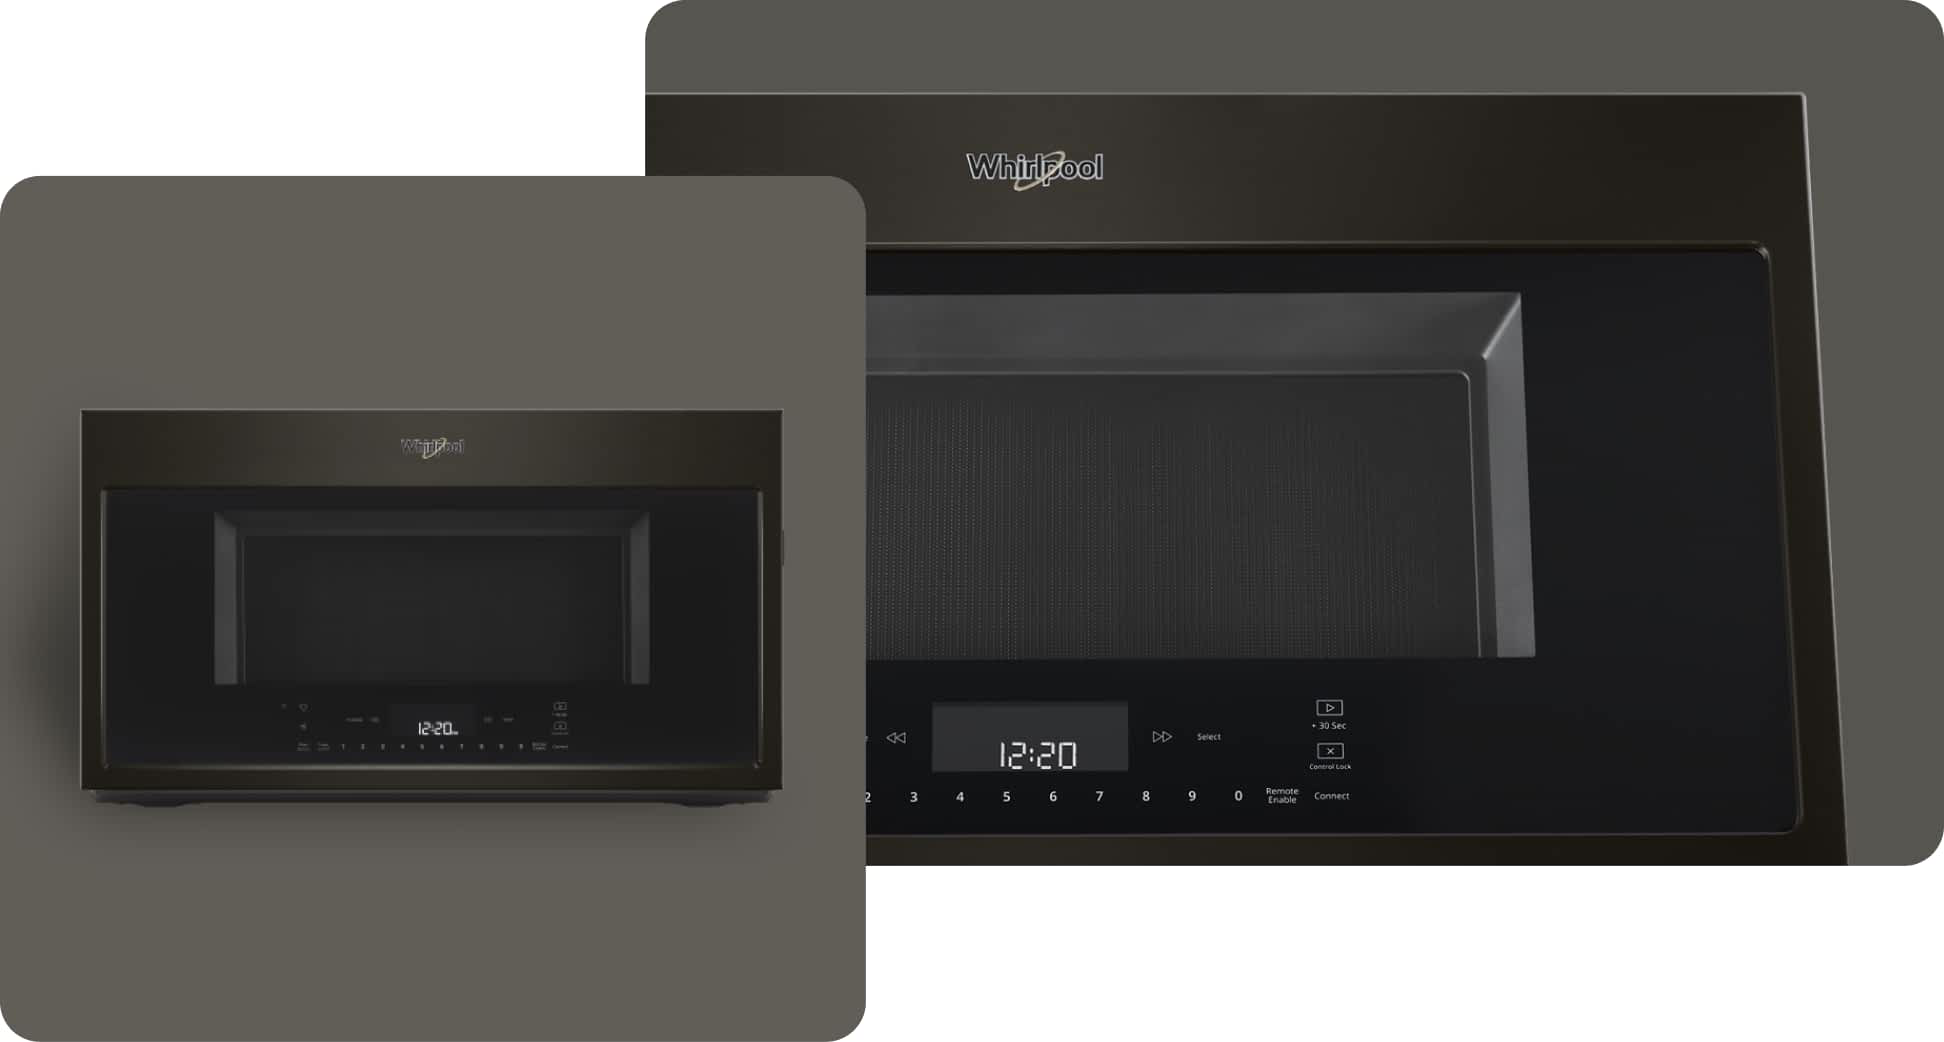 A Whirlpool® Microwave with a Fingerprint-Resistant Black Stainless Finish